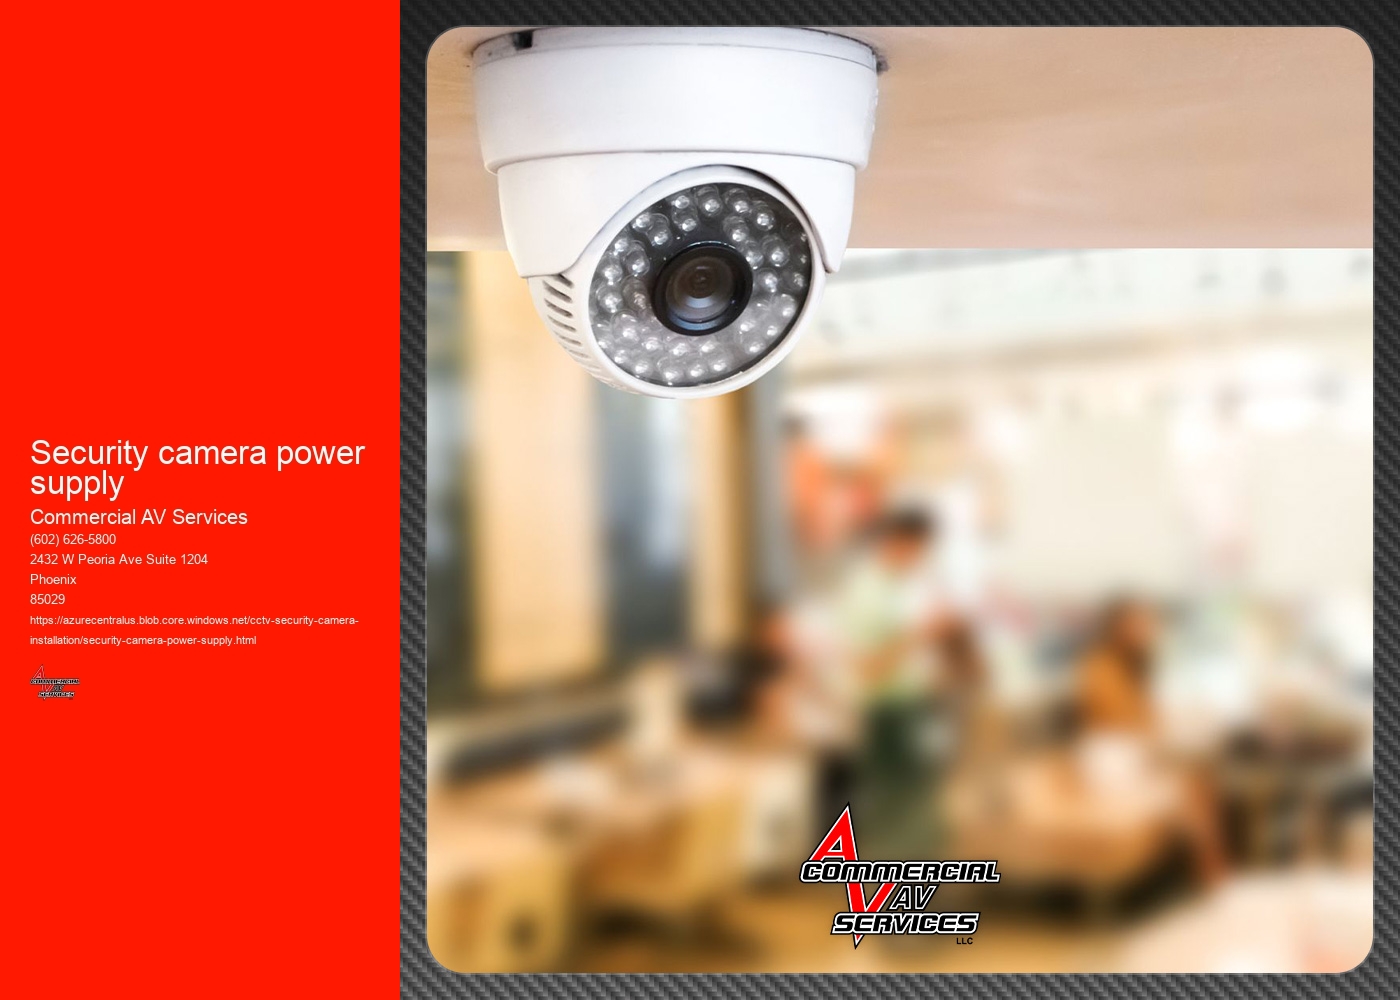 What are the key differences between centralized and decentralized power supply solutions for security camera systems, and which is more suitable for my setup?